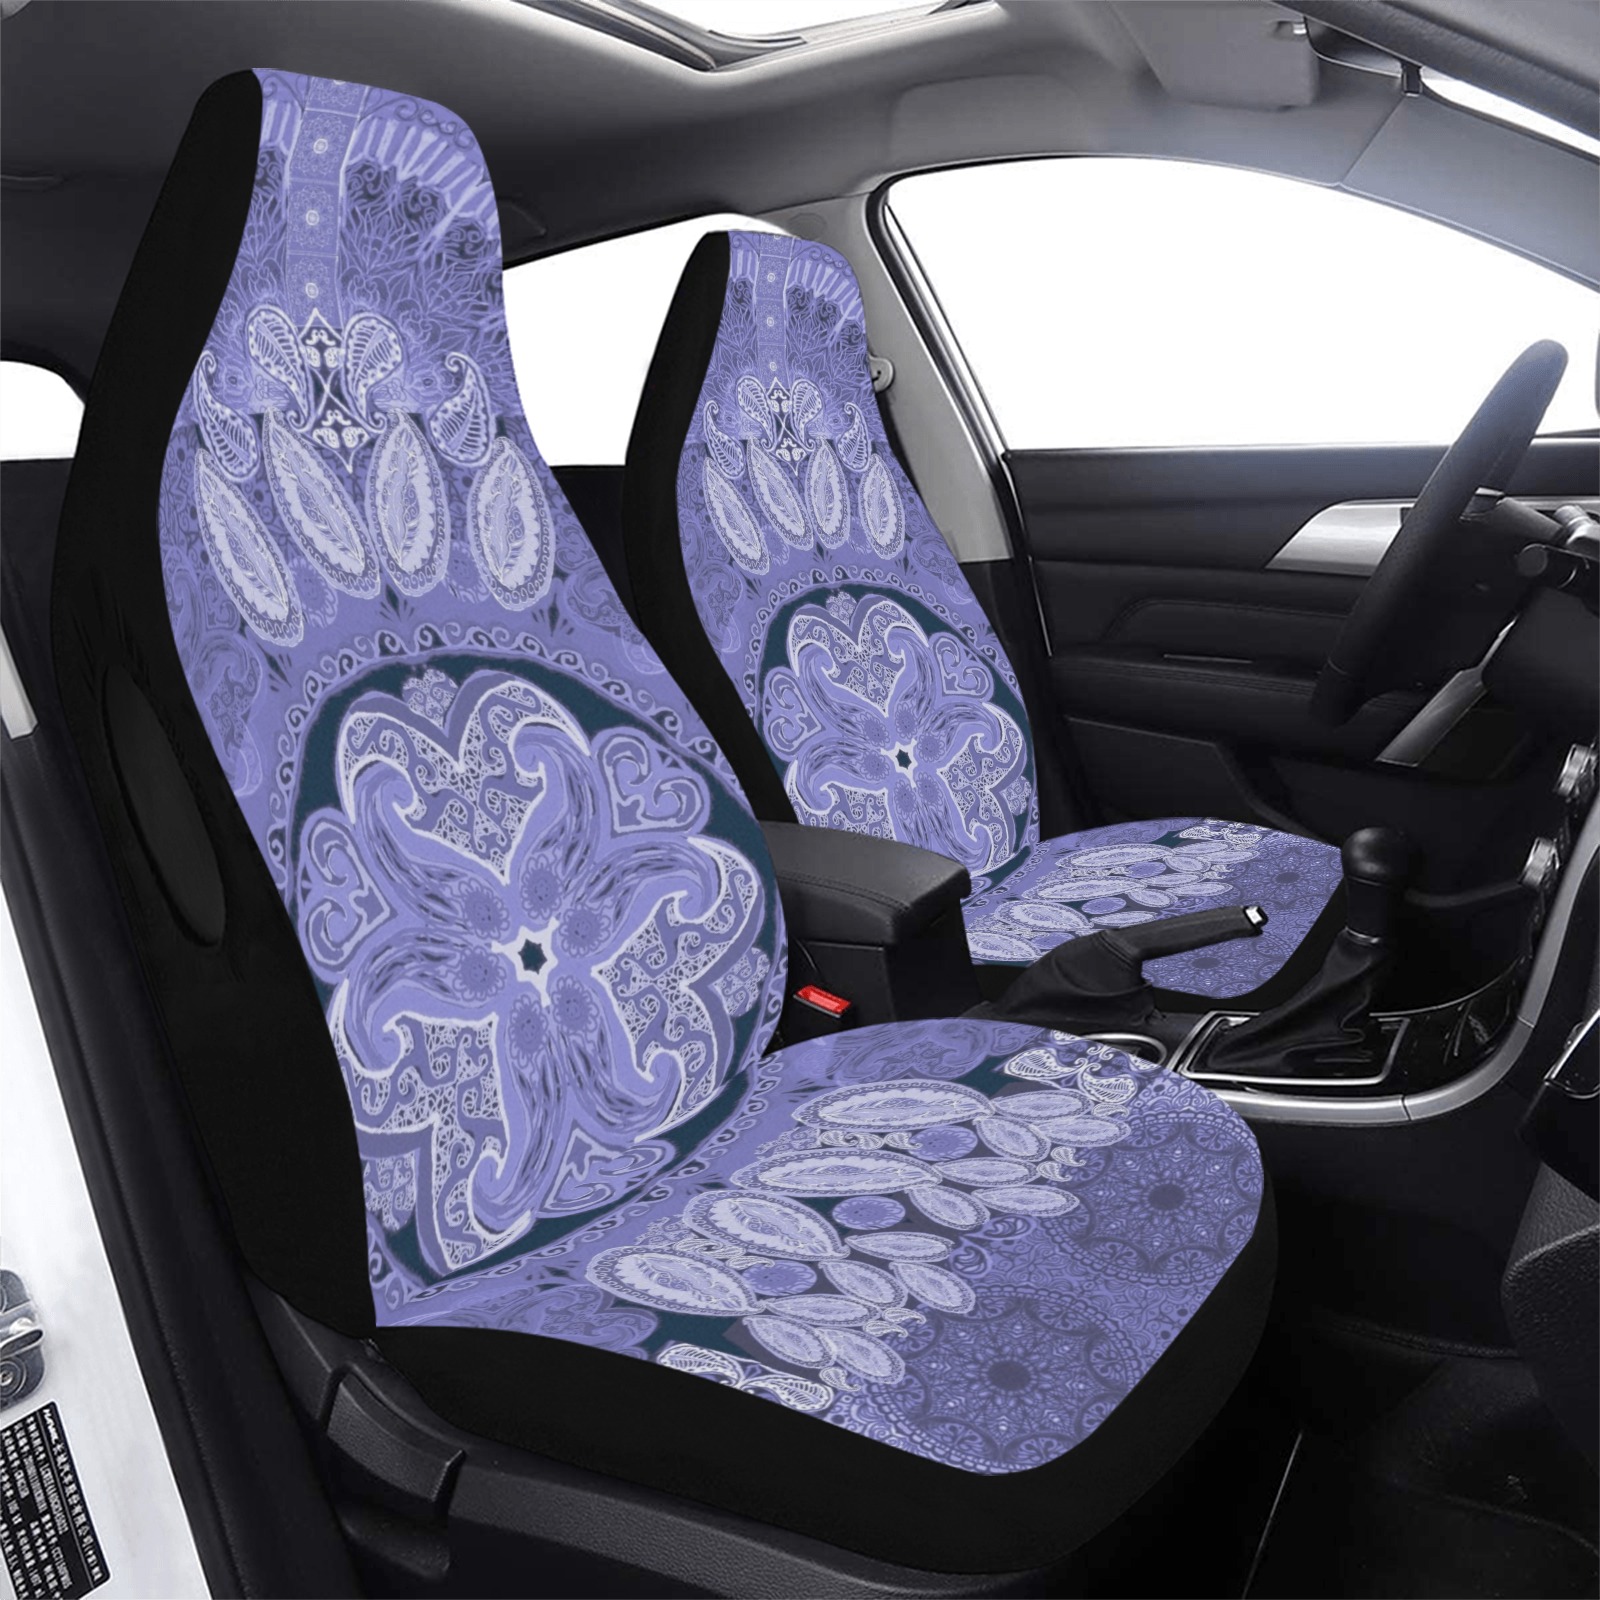 parsley 15 Car Seat Cover Airbag Compatible (Set of 2)